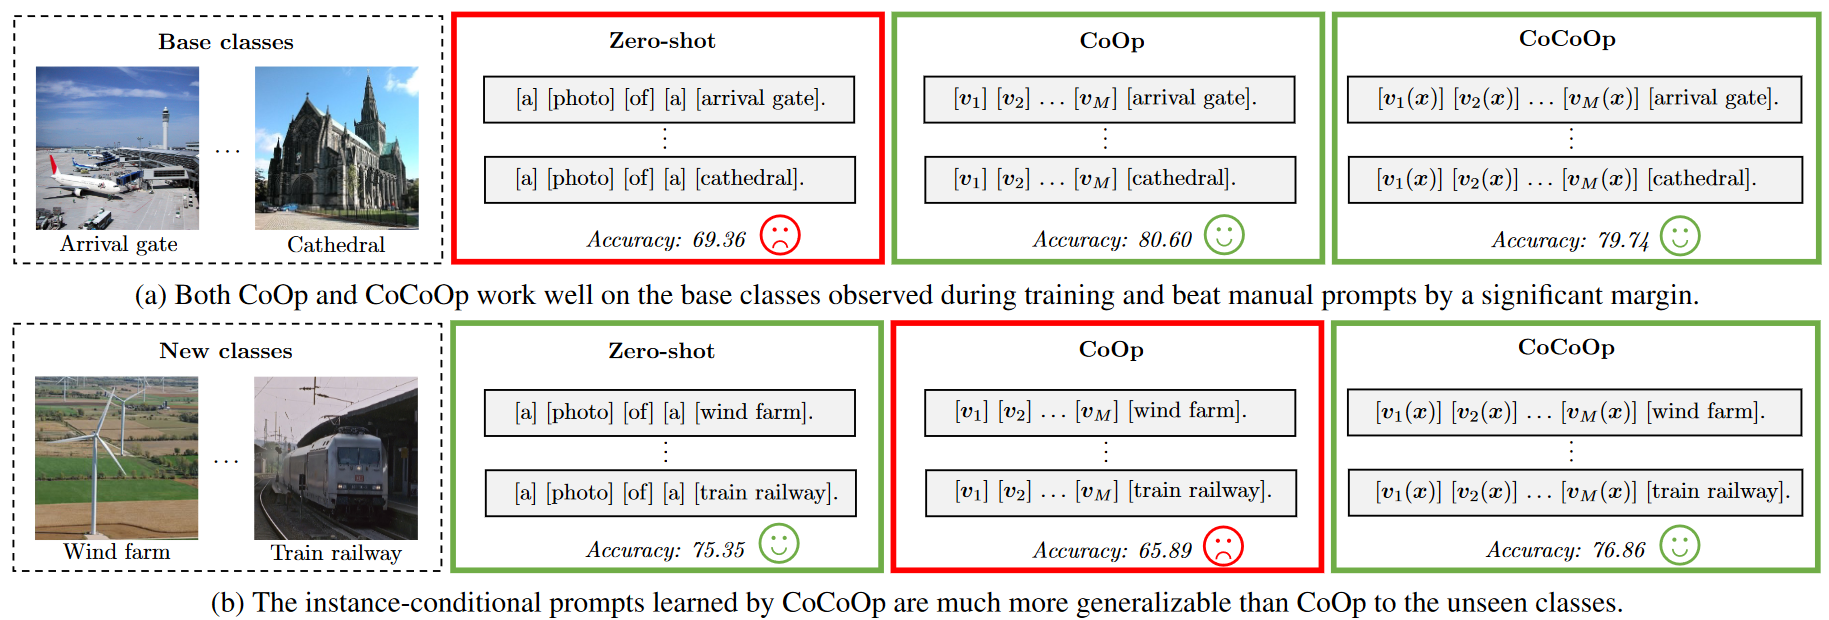 Motivation of our research: to learn generalizable prompts.